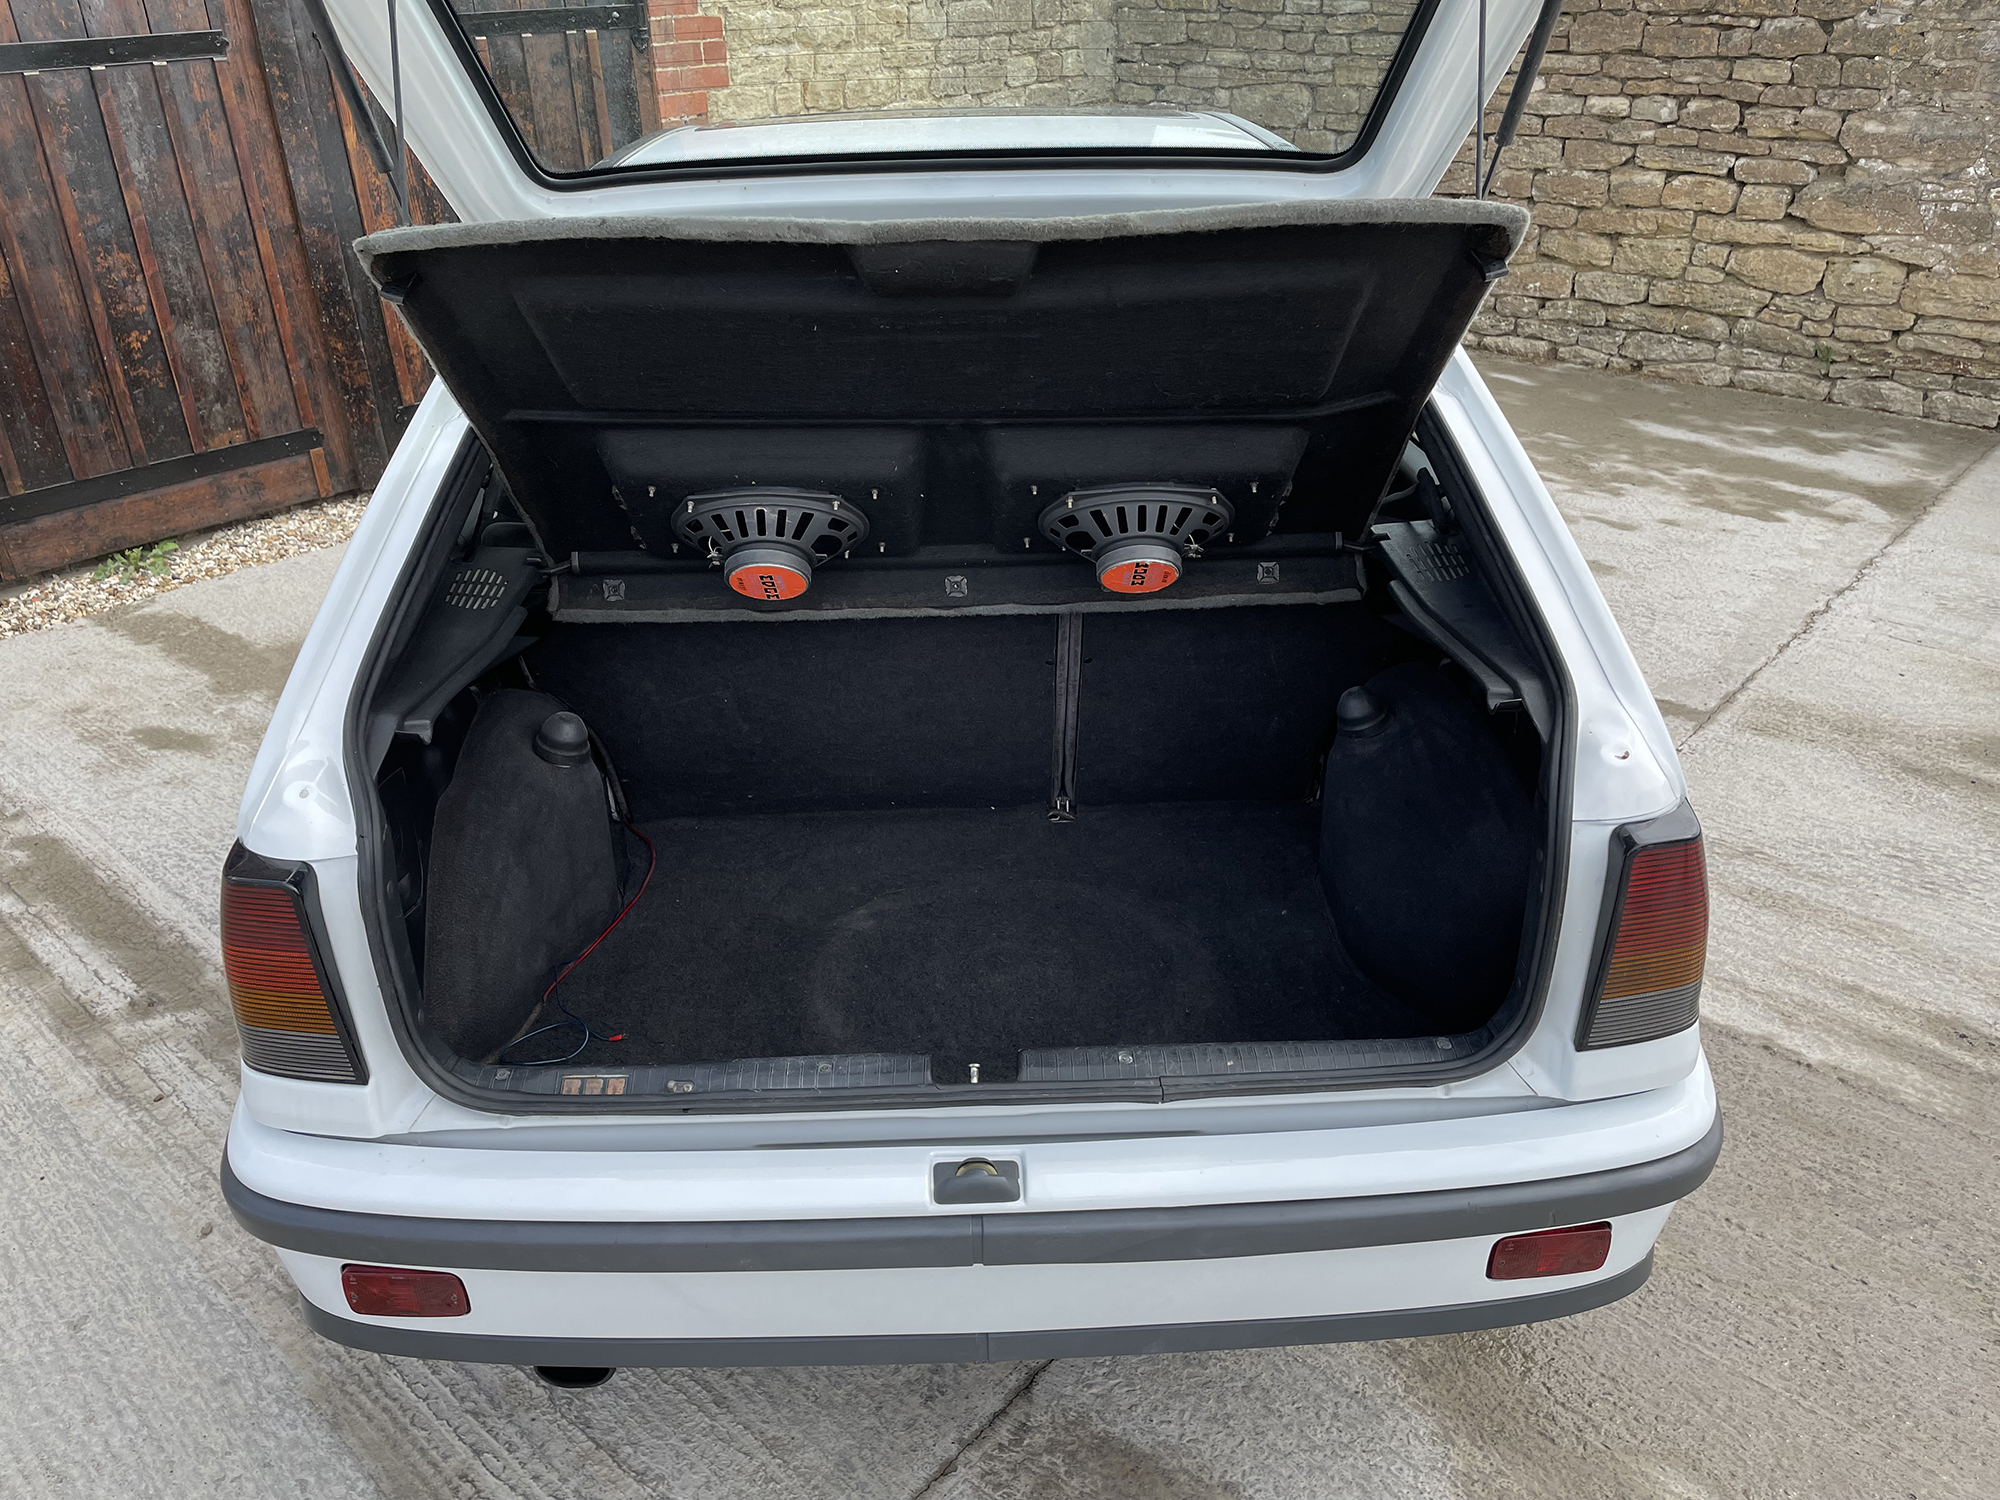 1989 Vauxhall Astra GTE 8V Reg. no. G78 JRP Chassis no. W0L000043LE112697 - Image 12 of 18